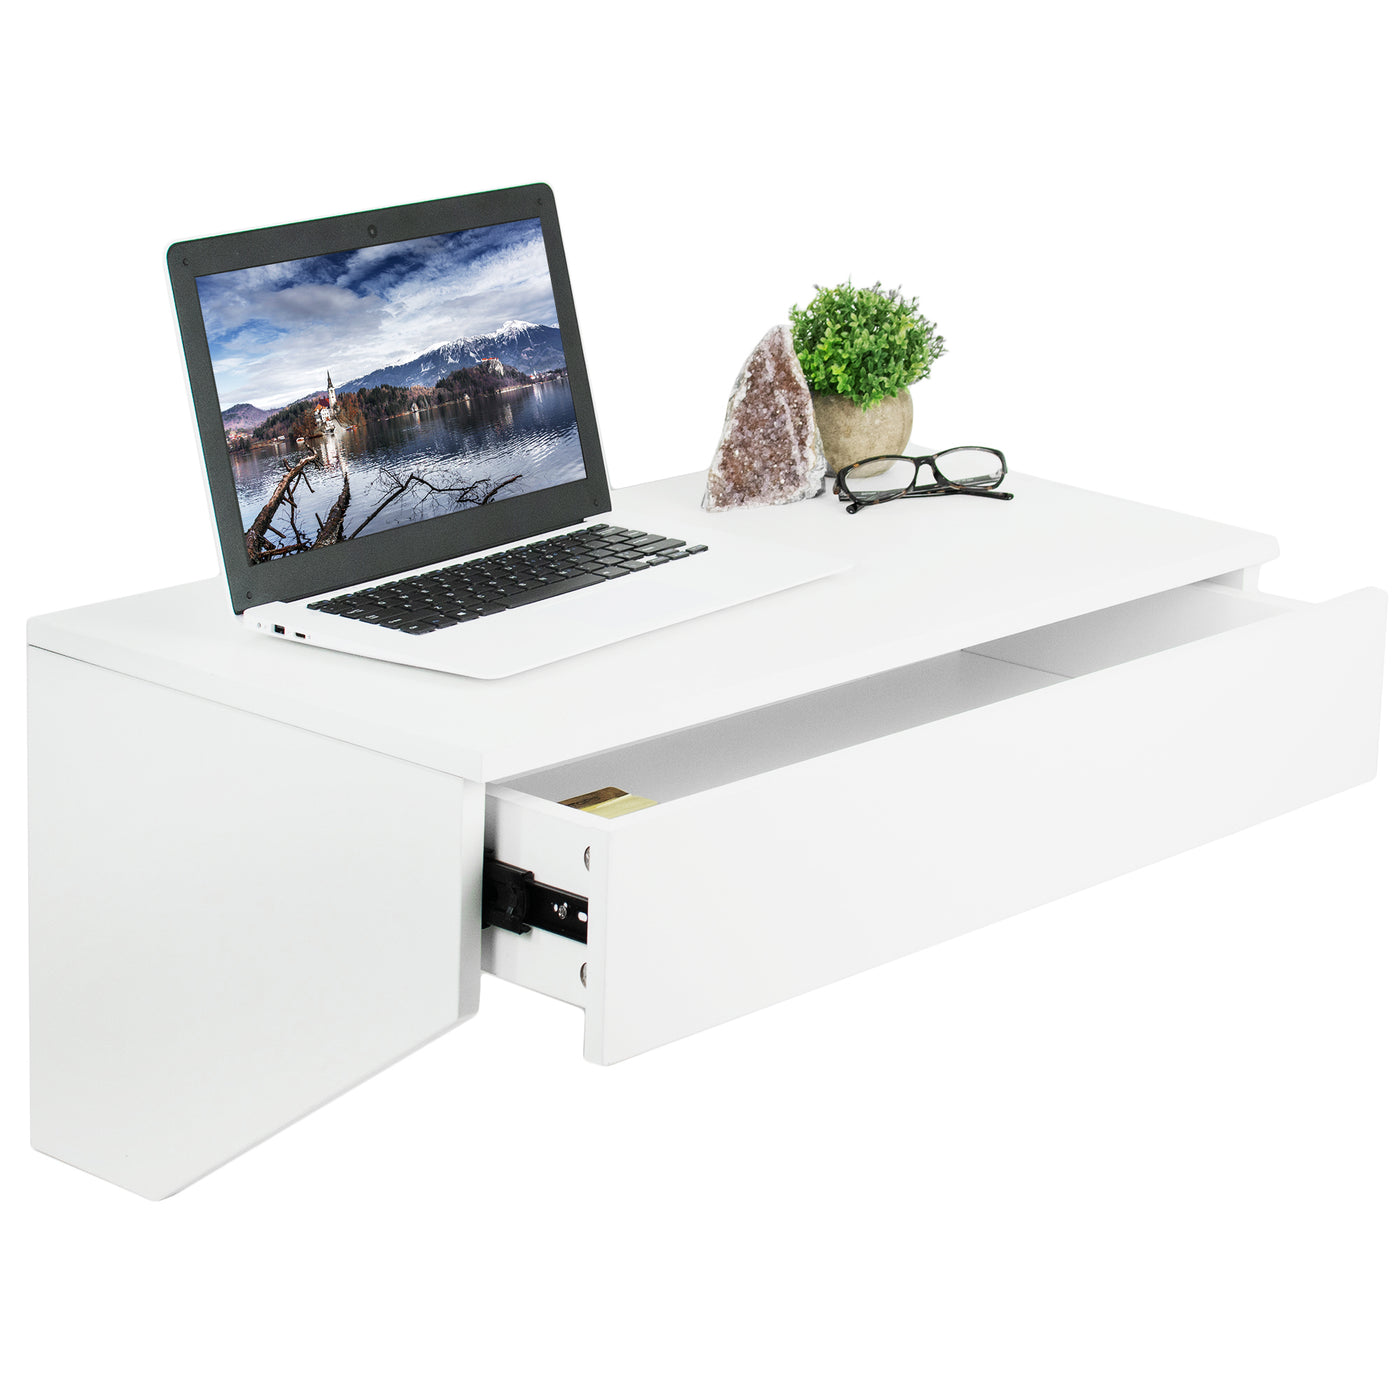 Sturdy wall mount desk with drawer.